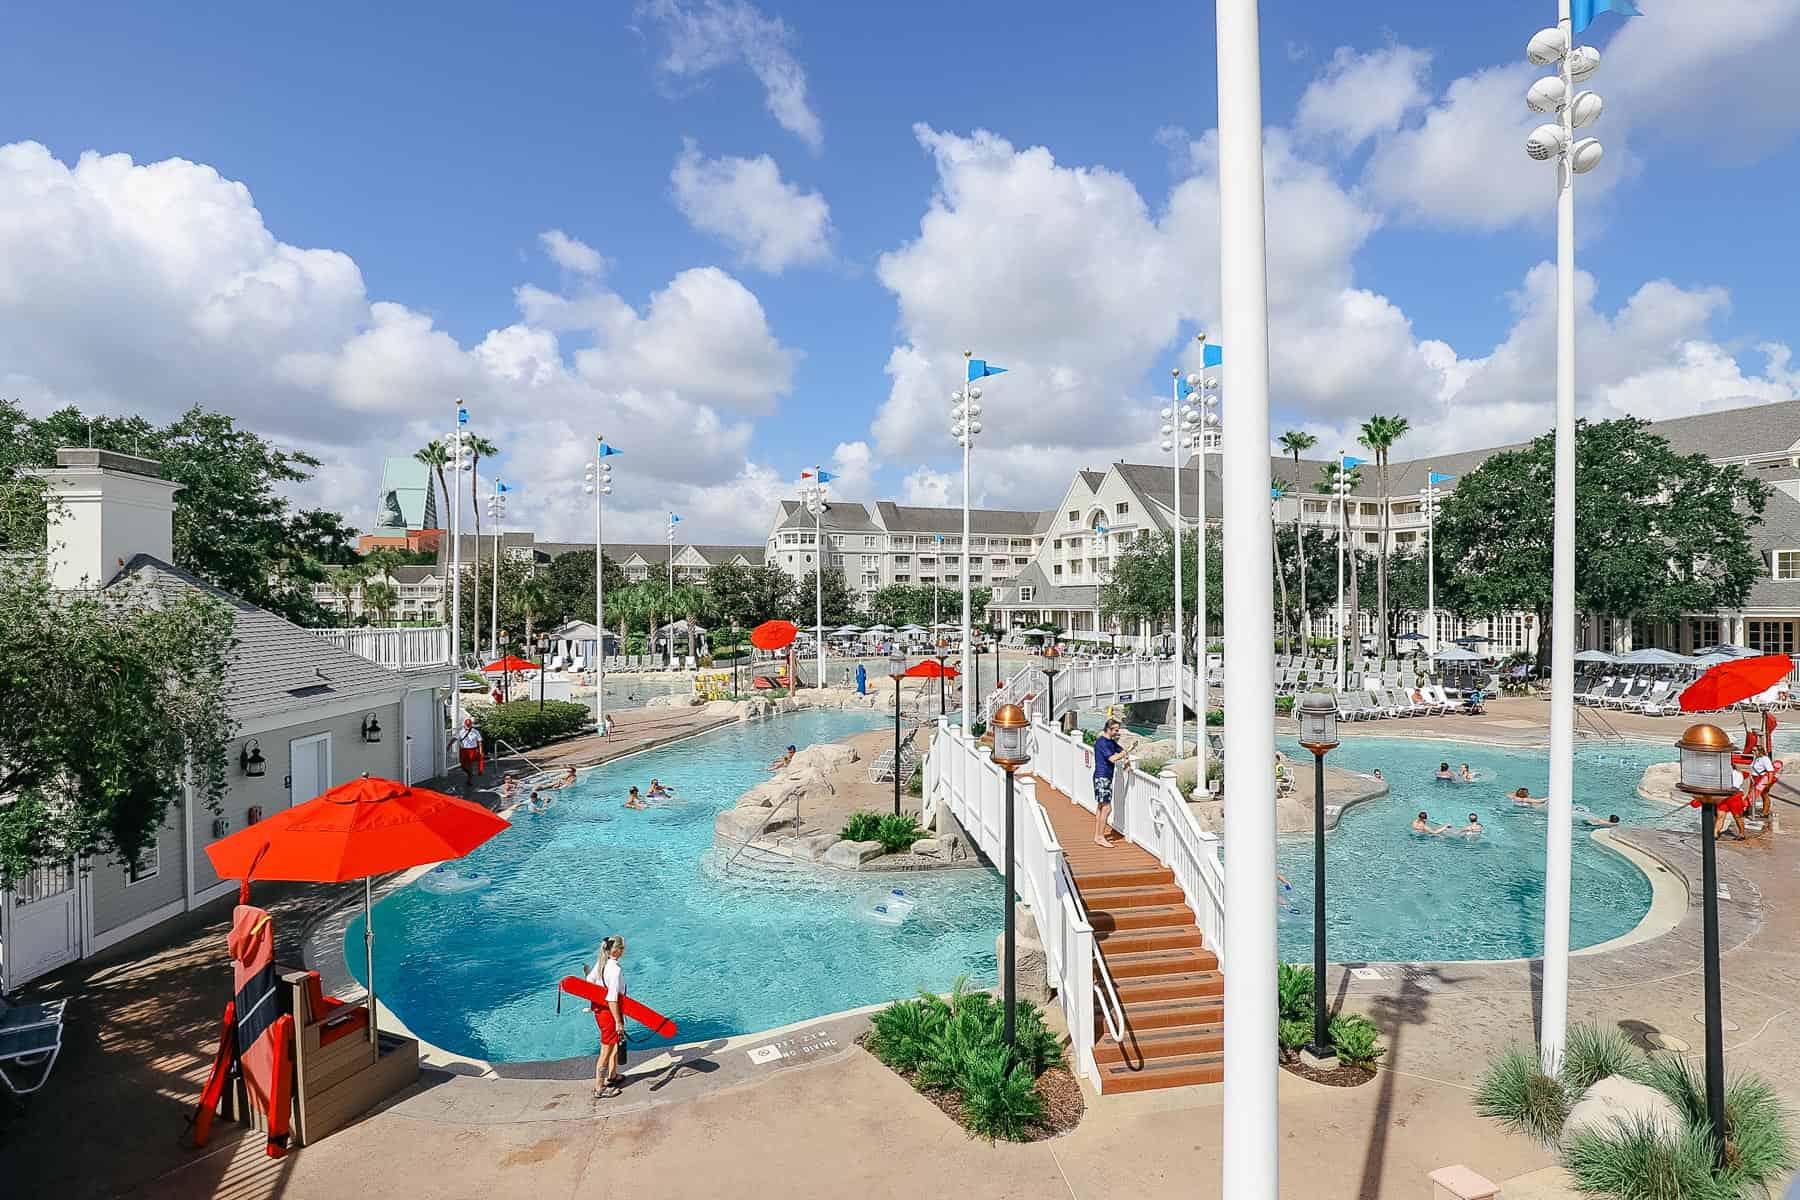 The circular shape of the lazy river at Disney's Beach Club. 